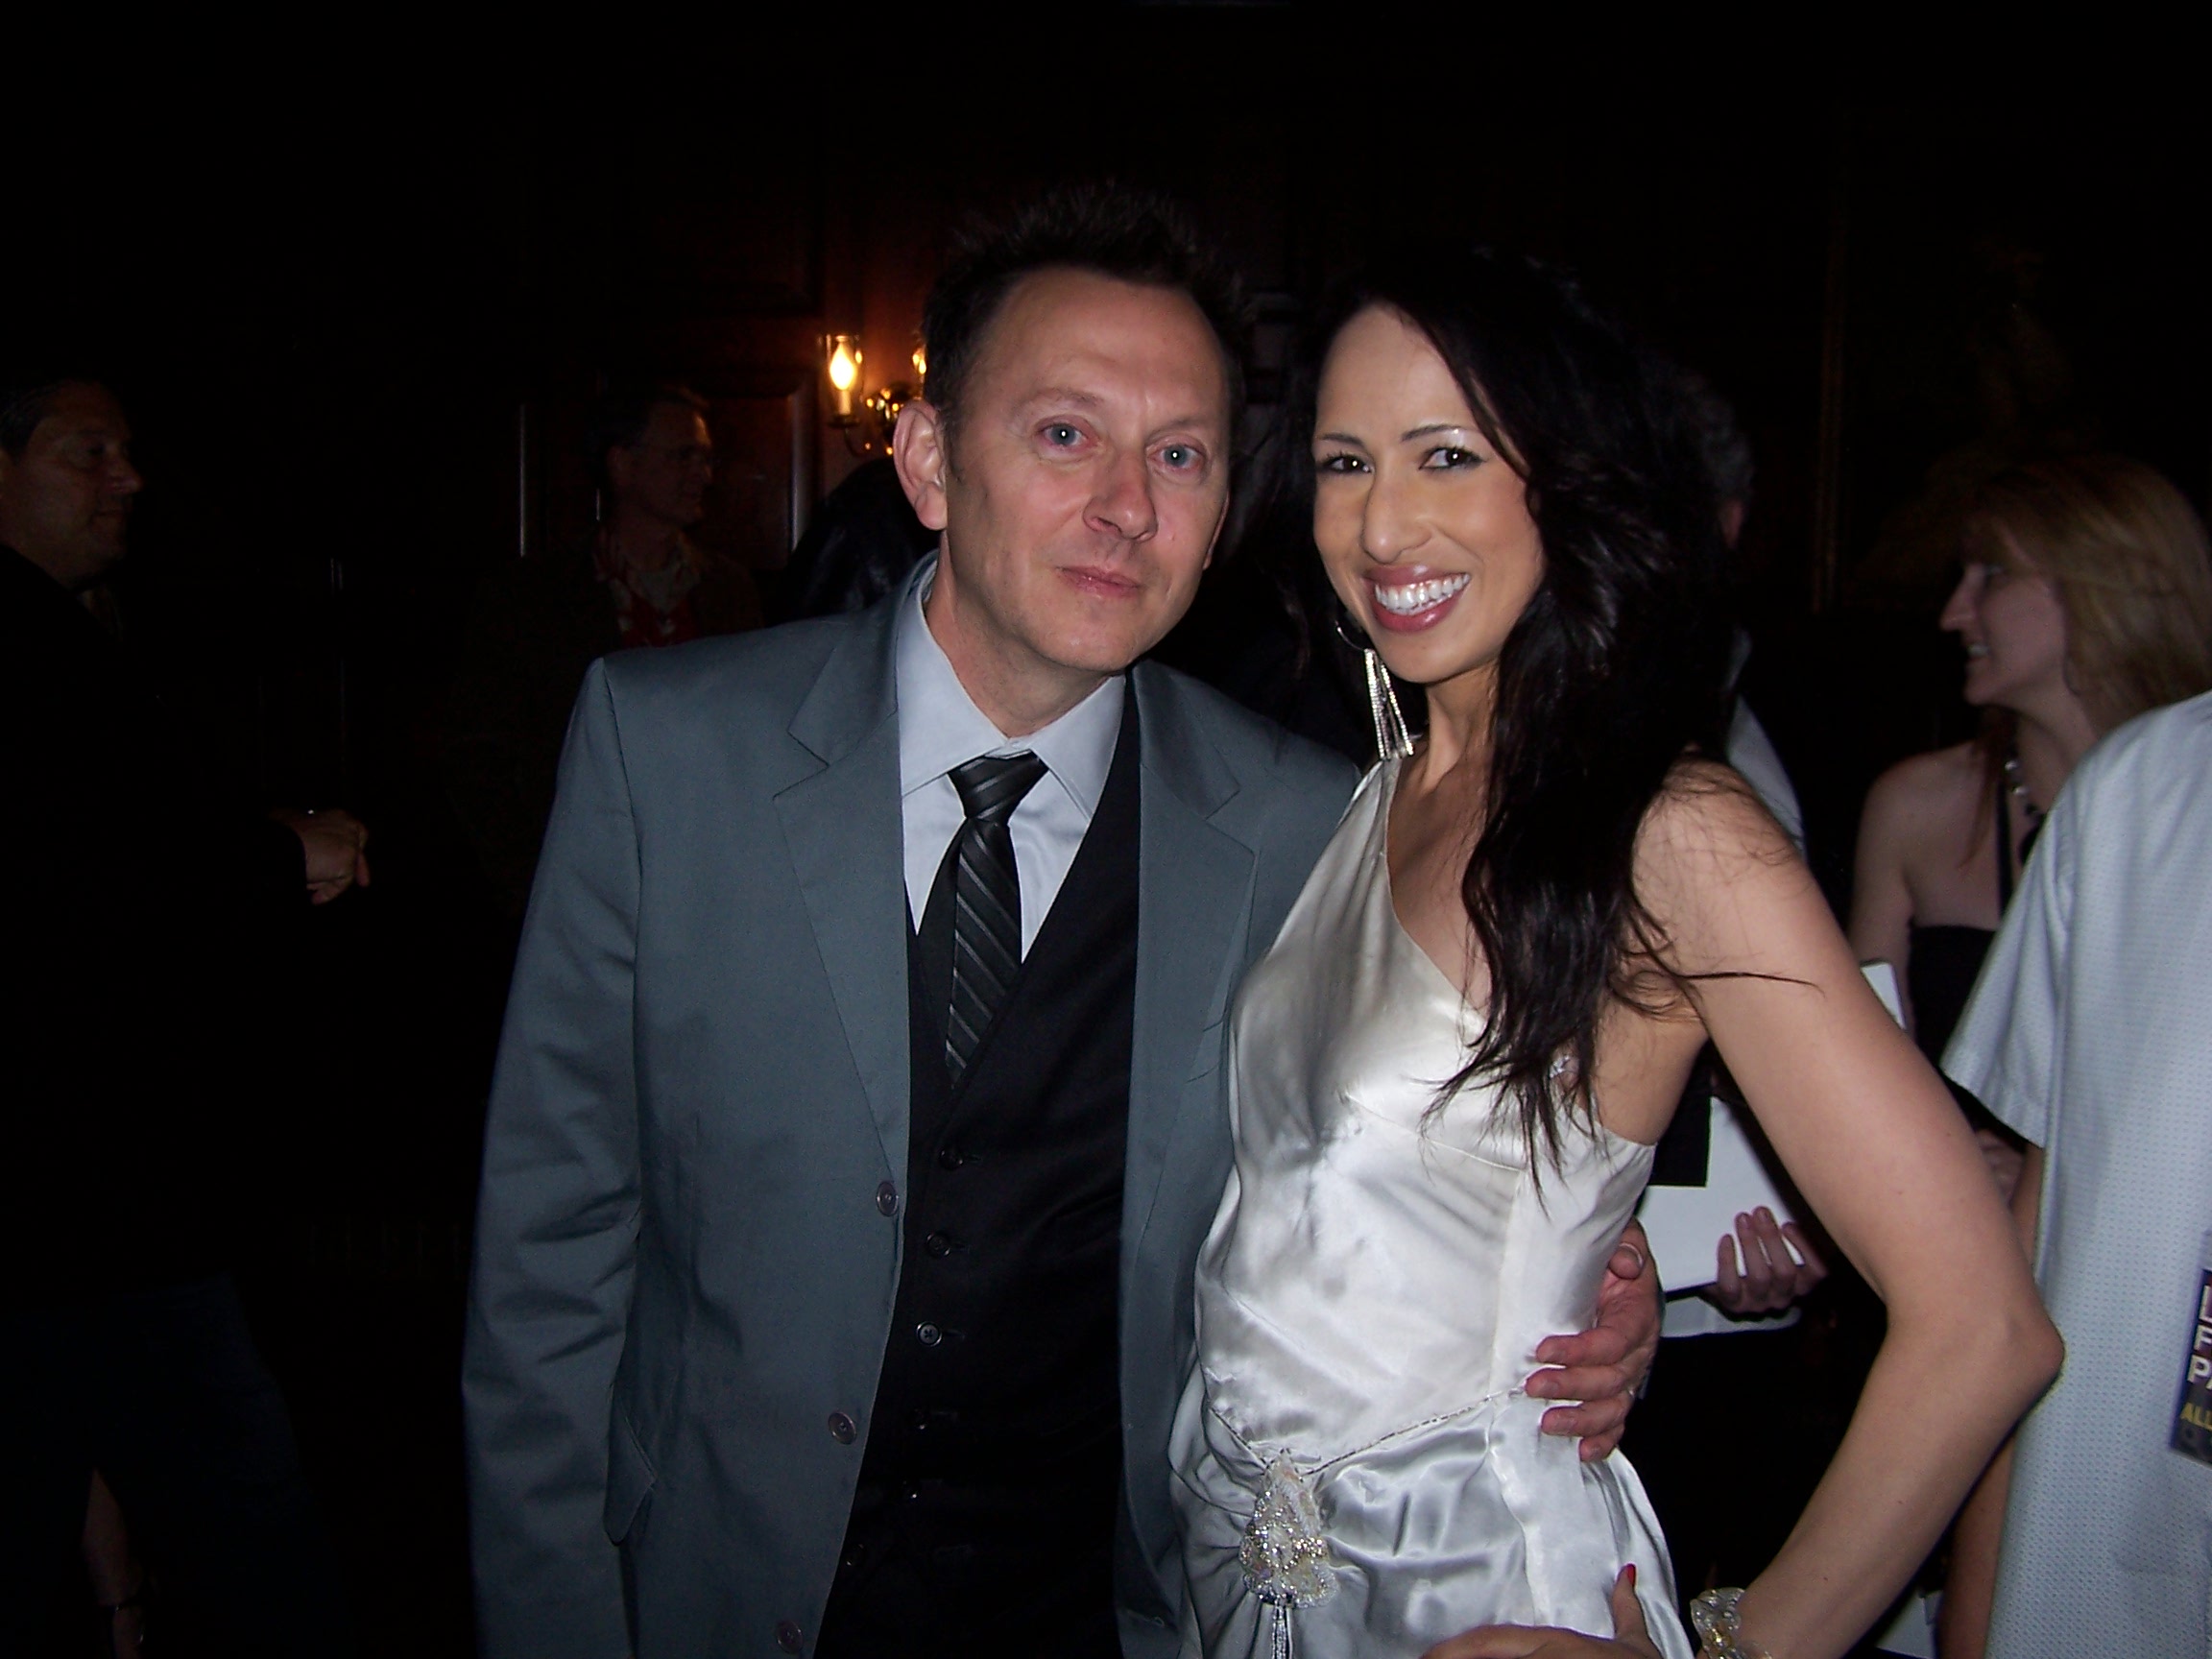 Elly Kaye and Michael Emerson at the LOST Fan Finale Party in Downtown Los Angeles